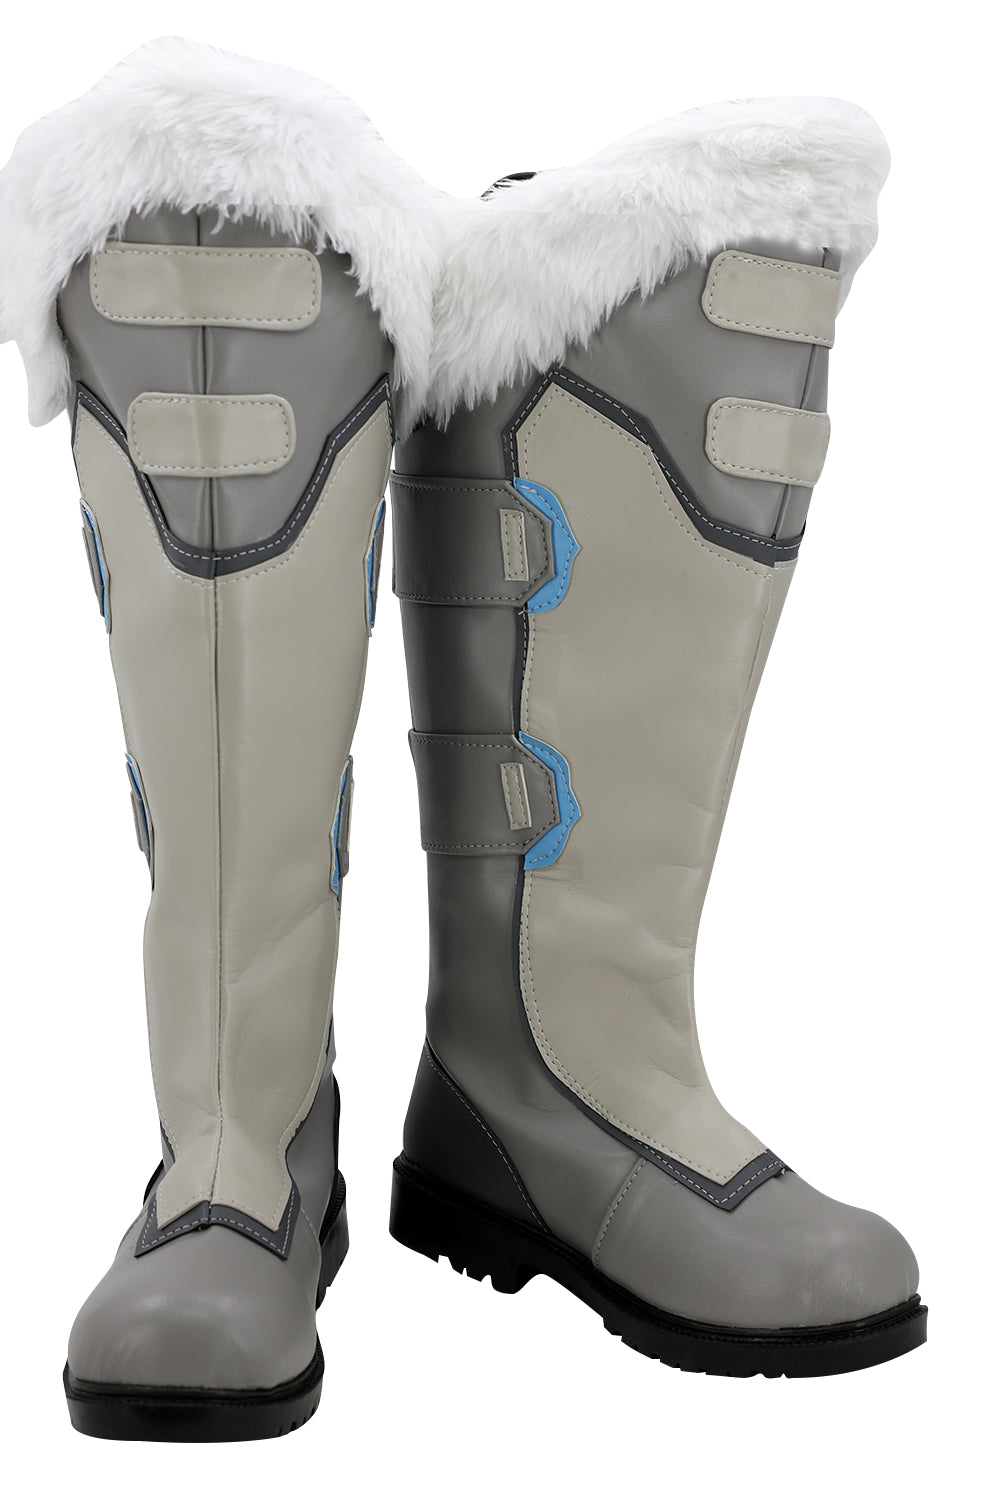 Overwatch Mei Cosplay Chaussure